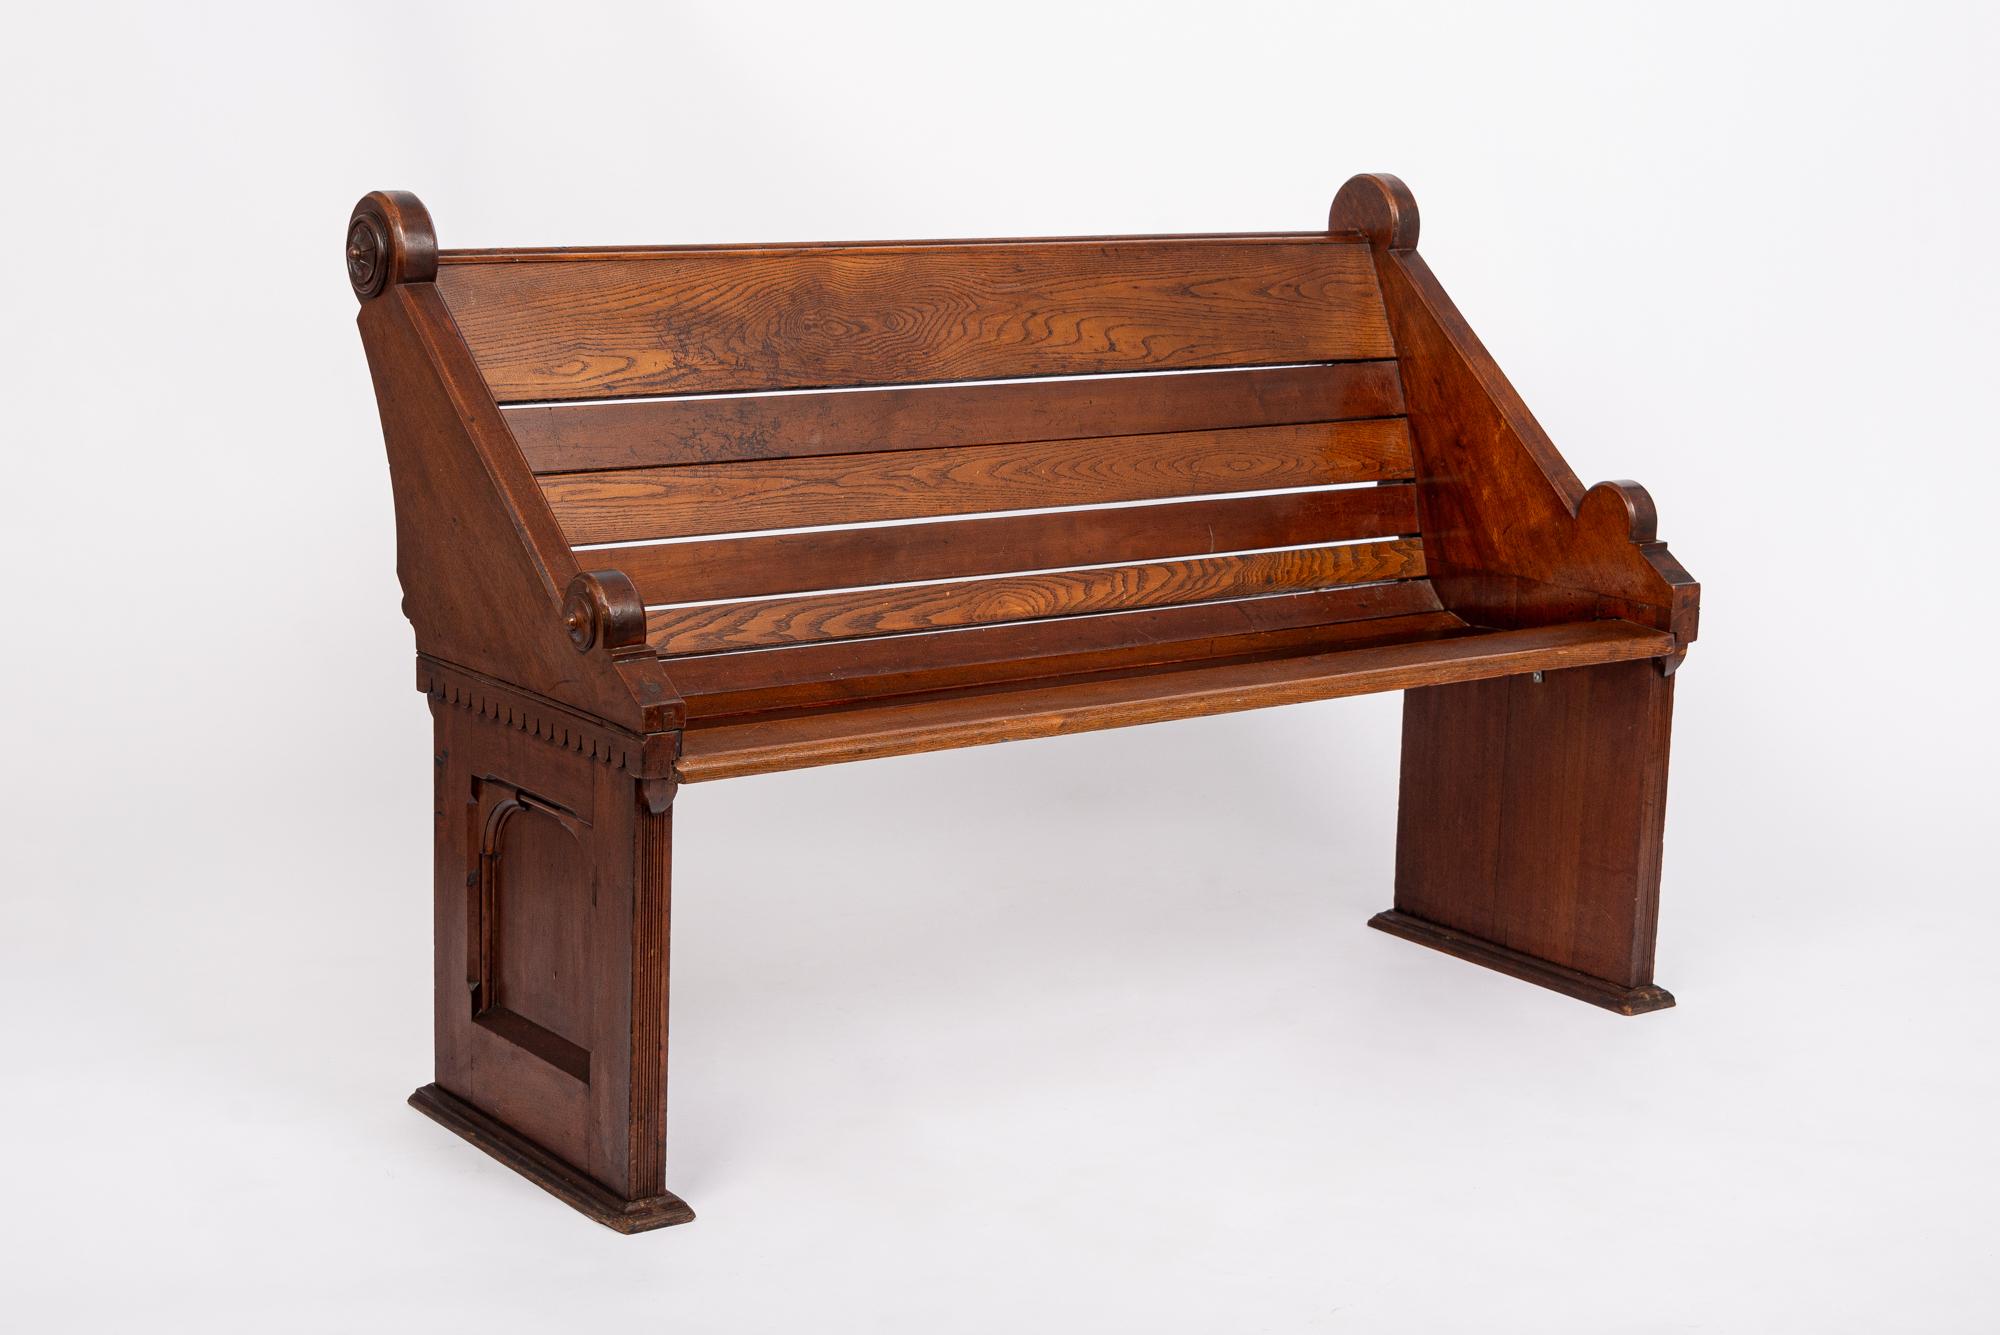 This exceptional antique Aesthetic Movement wooden church bench is circa 1870, possibly originating from Virginia. This lovely bench is handcrafted from solid oak and walnut wood with elegant design detailing indicative of the Aesthetic Movement in